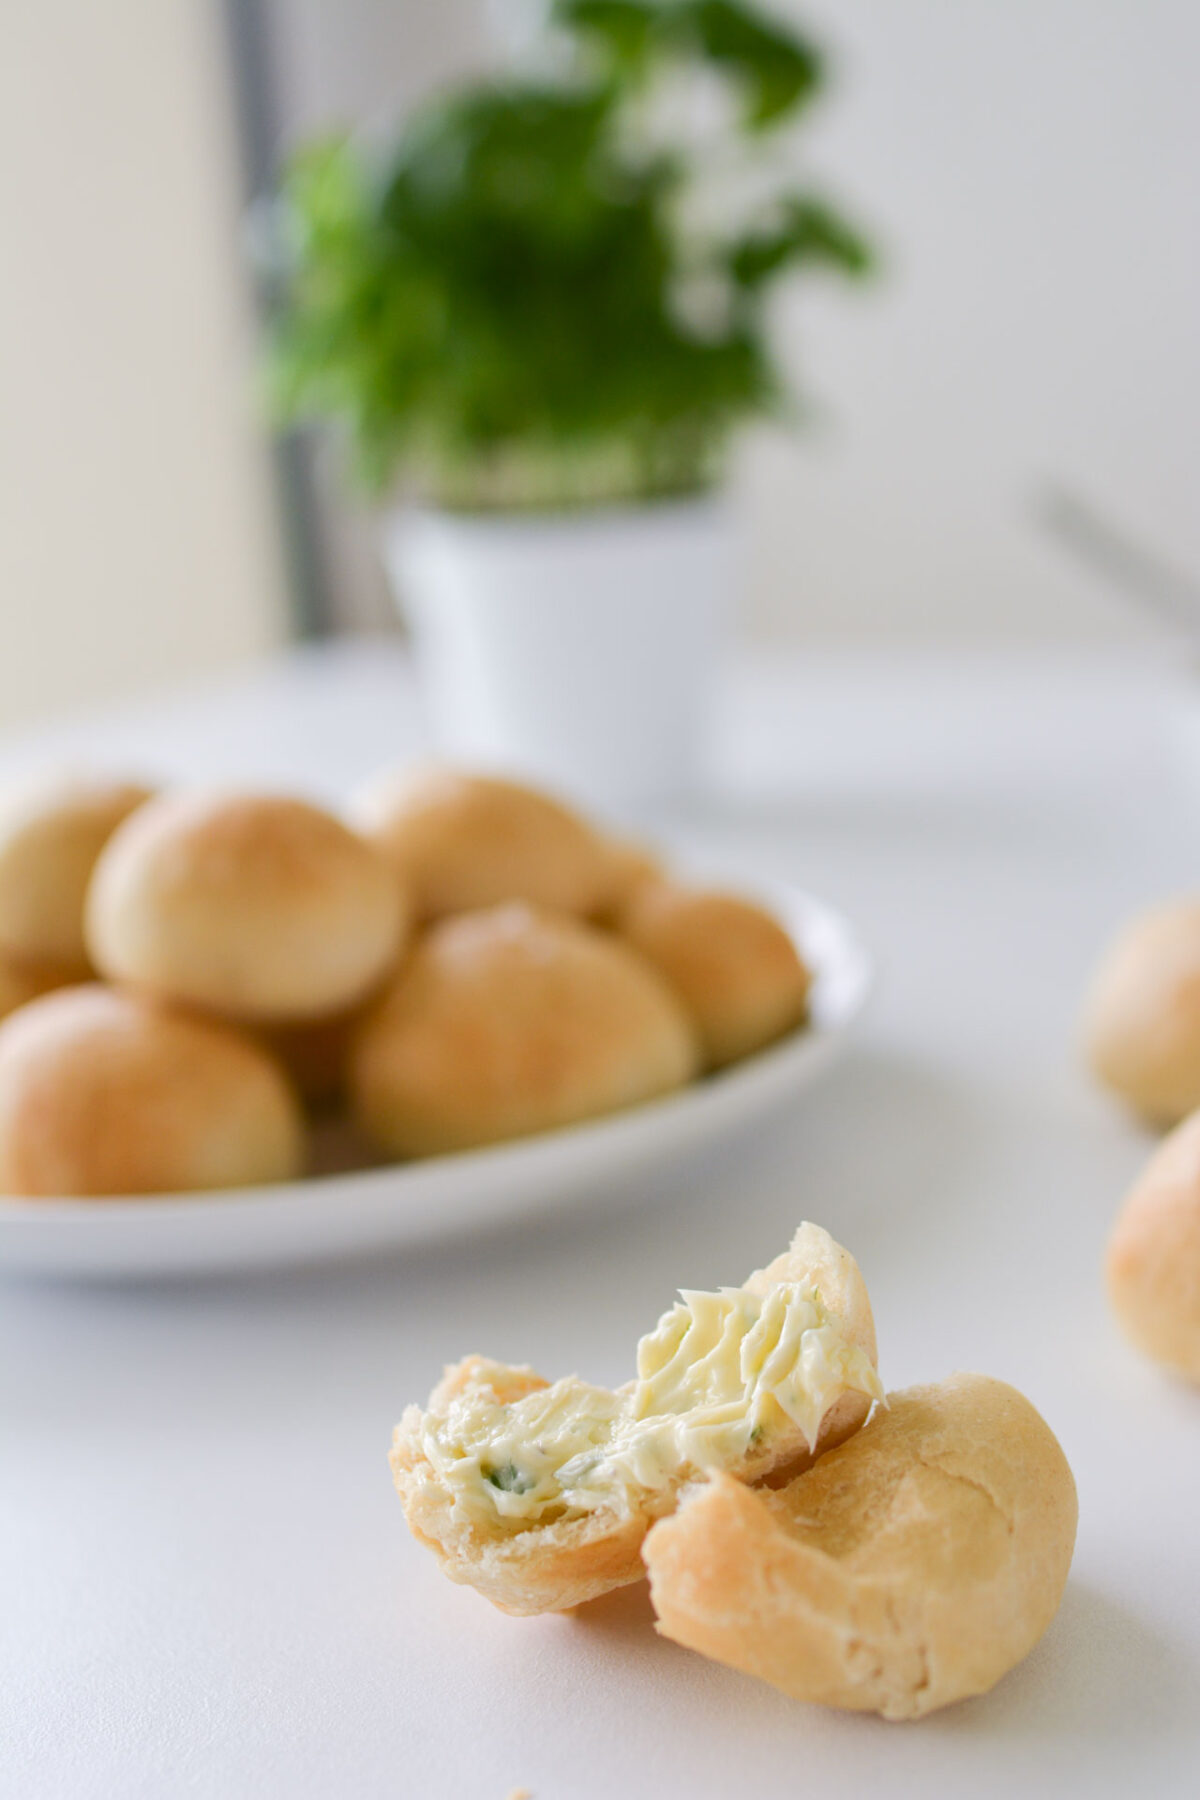 A close-up image of a single doughball featuring a flavorful homemade garlic butter, with a plate full of neatly arranged doughballs in the background.